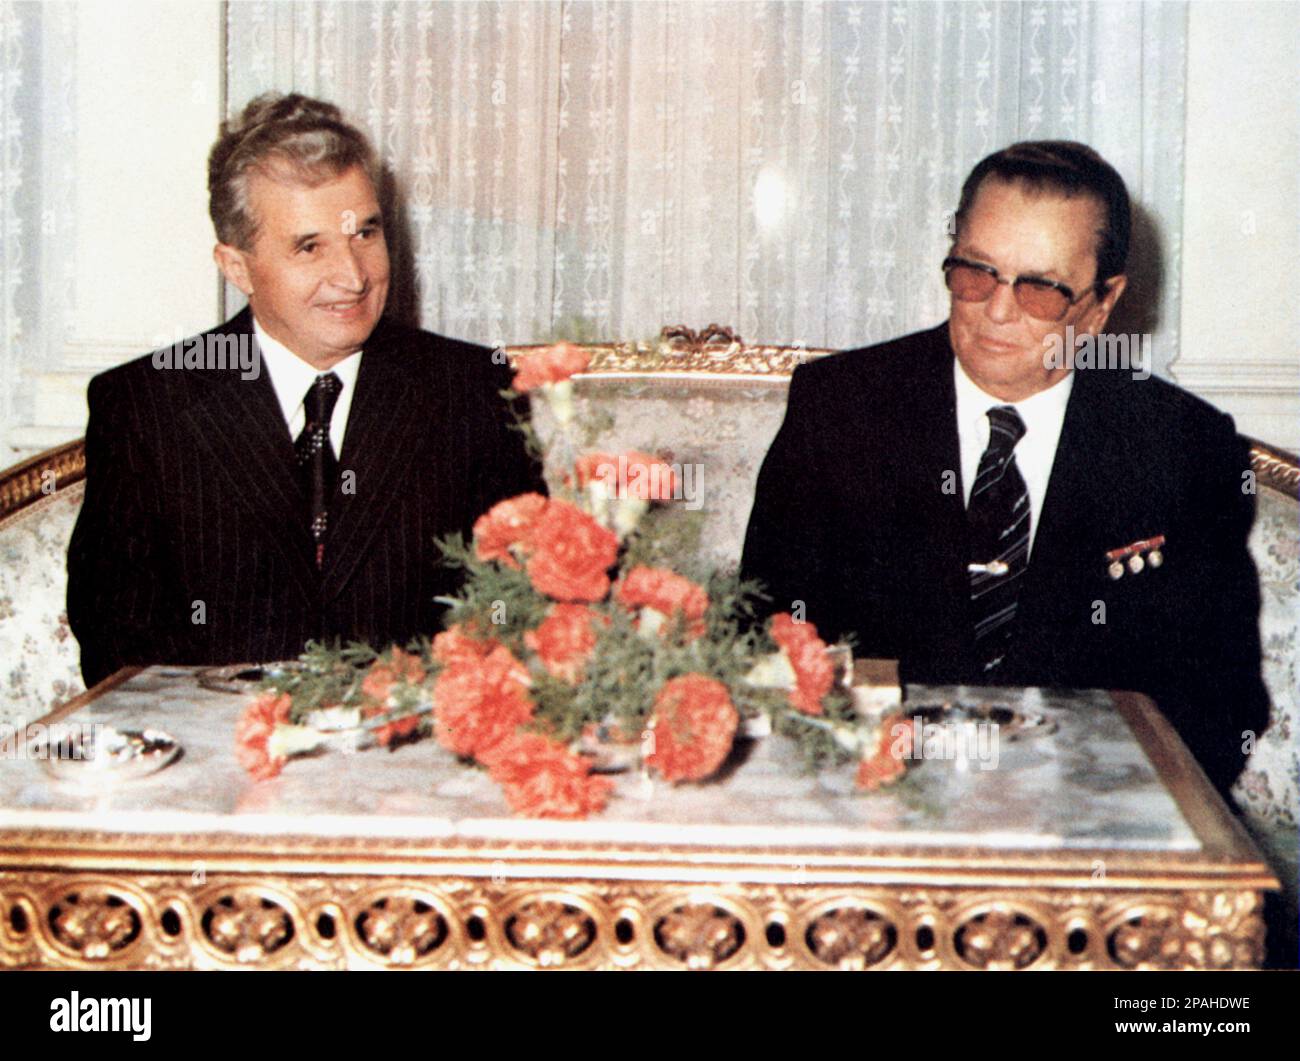 The Romania politician  and dictator NICOLAE CEAUSESCU ( January 26, 1918 – December 25, 1989 ) with JOSIP BROZ TITO ( 1892 - 1990 ) , he leader of the Socialist Federal Republic of Yugoslavia from 1945 until his death . Ceausescu was the leader of Romania from 1965 until December 1989, when a revolution and coup removed him from power. The revolutionaries held a two hour trial and sentenced him to death for crimes against the state, genocide, and ' undermining the national economy.' The hasty trial has been criticized as a kangaroo court  His subsequent execution marked the final act of the R Stock Photo